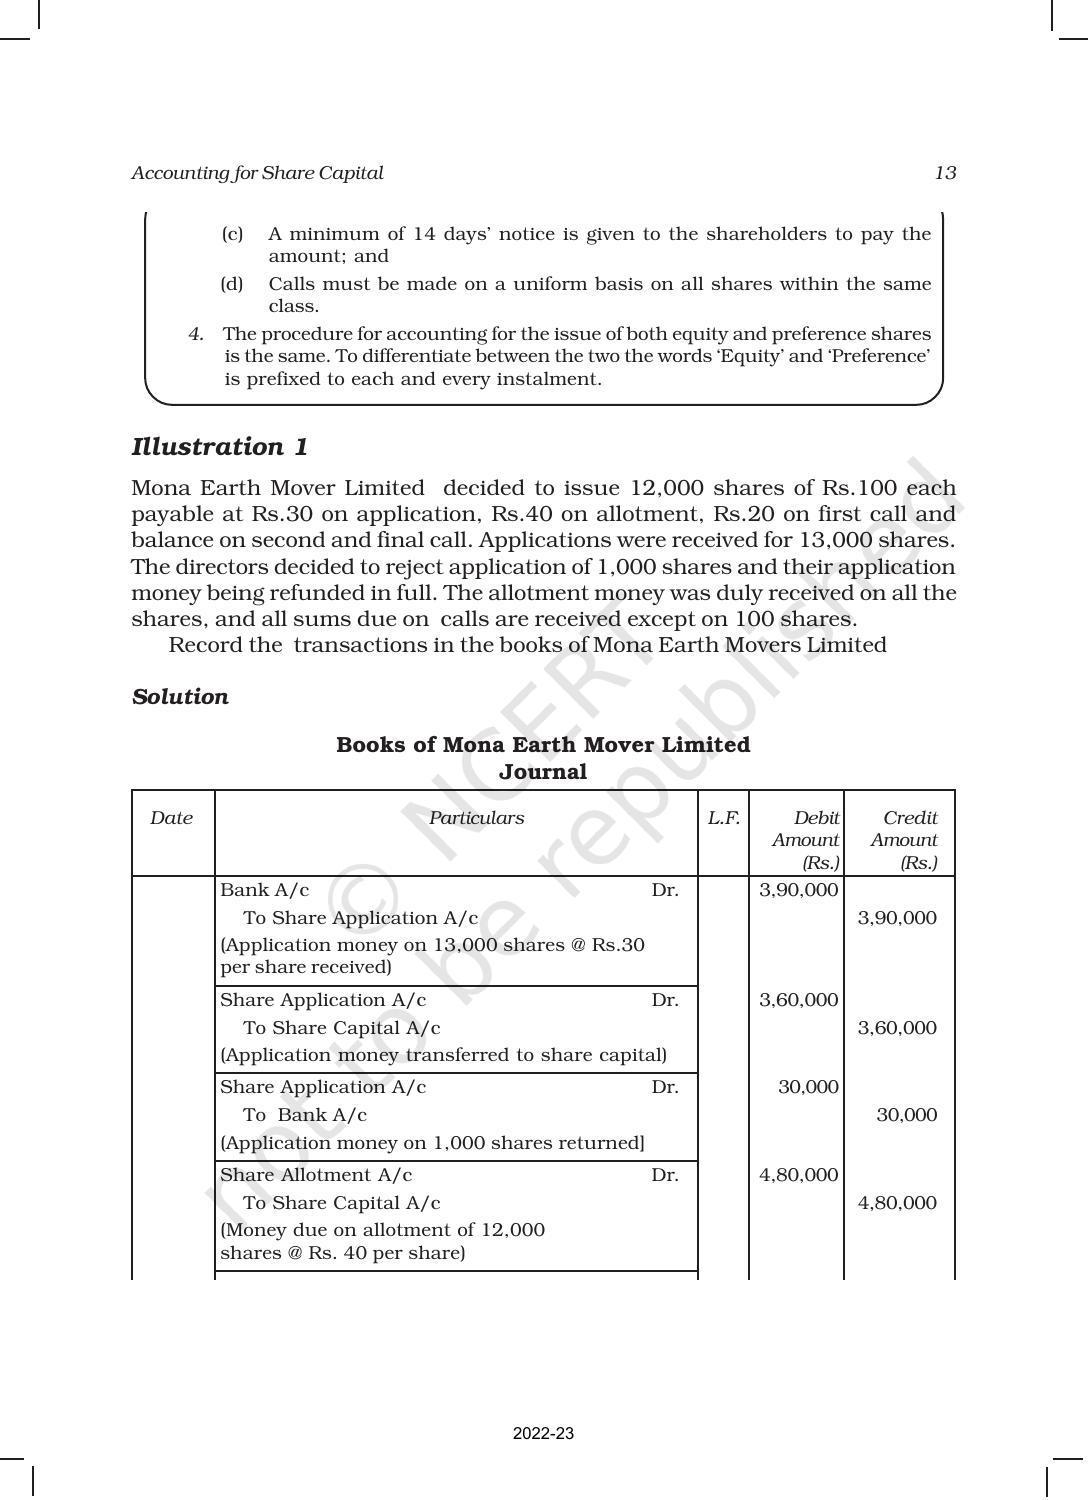 NCERT Book for Class 12 Accountancy Part II Chapter 1 Accounting for Share Capital - Page 13